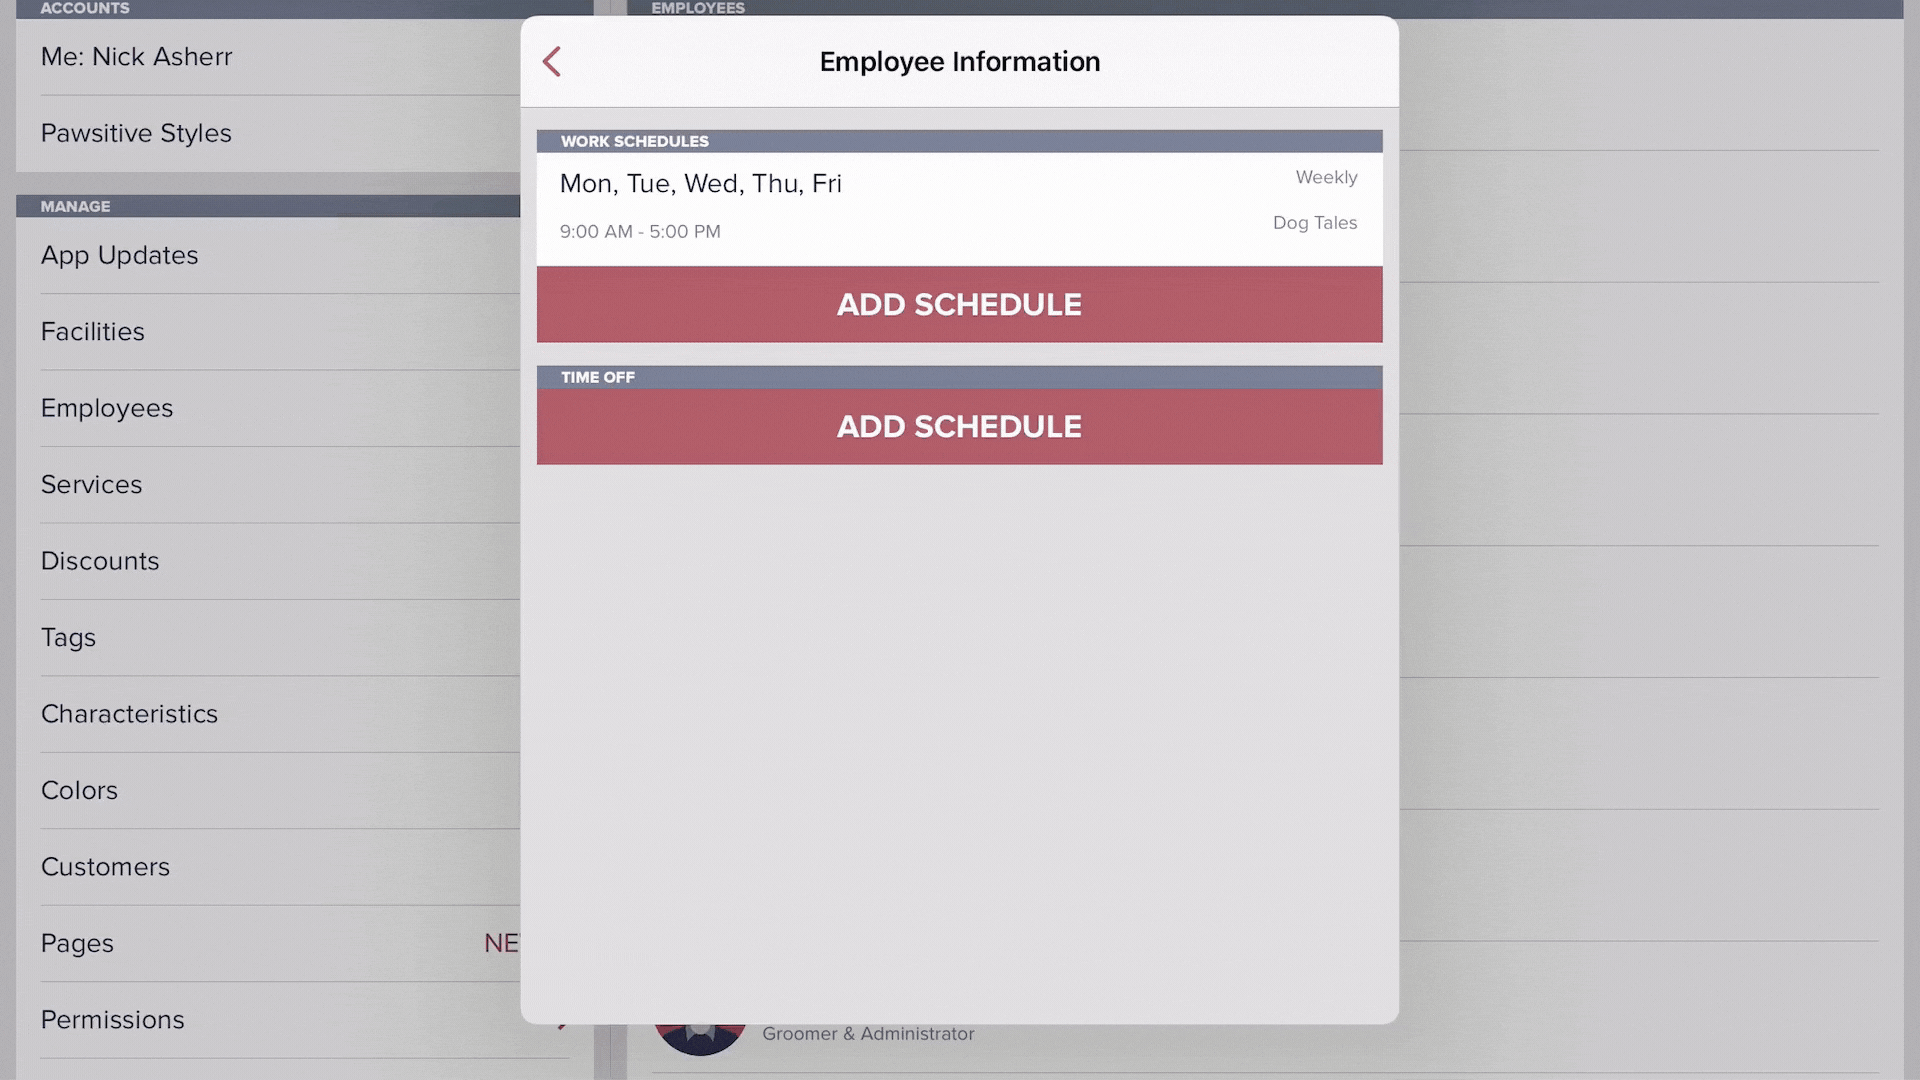 Adding appointments to the employee schedule